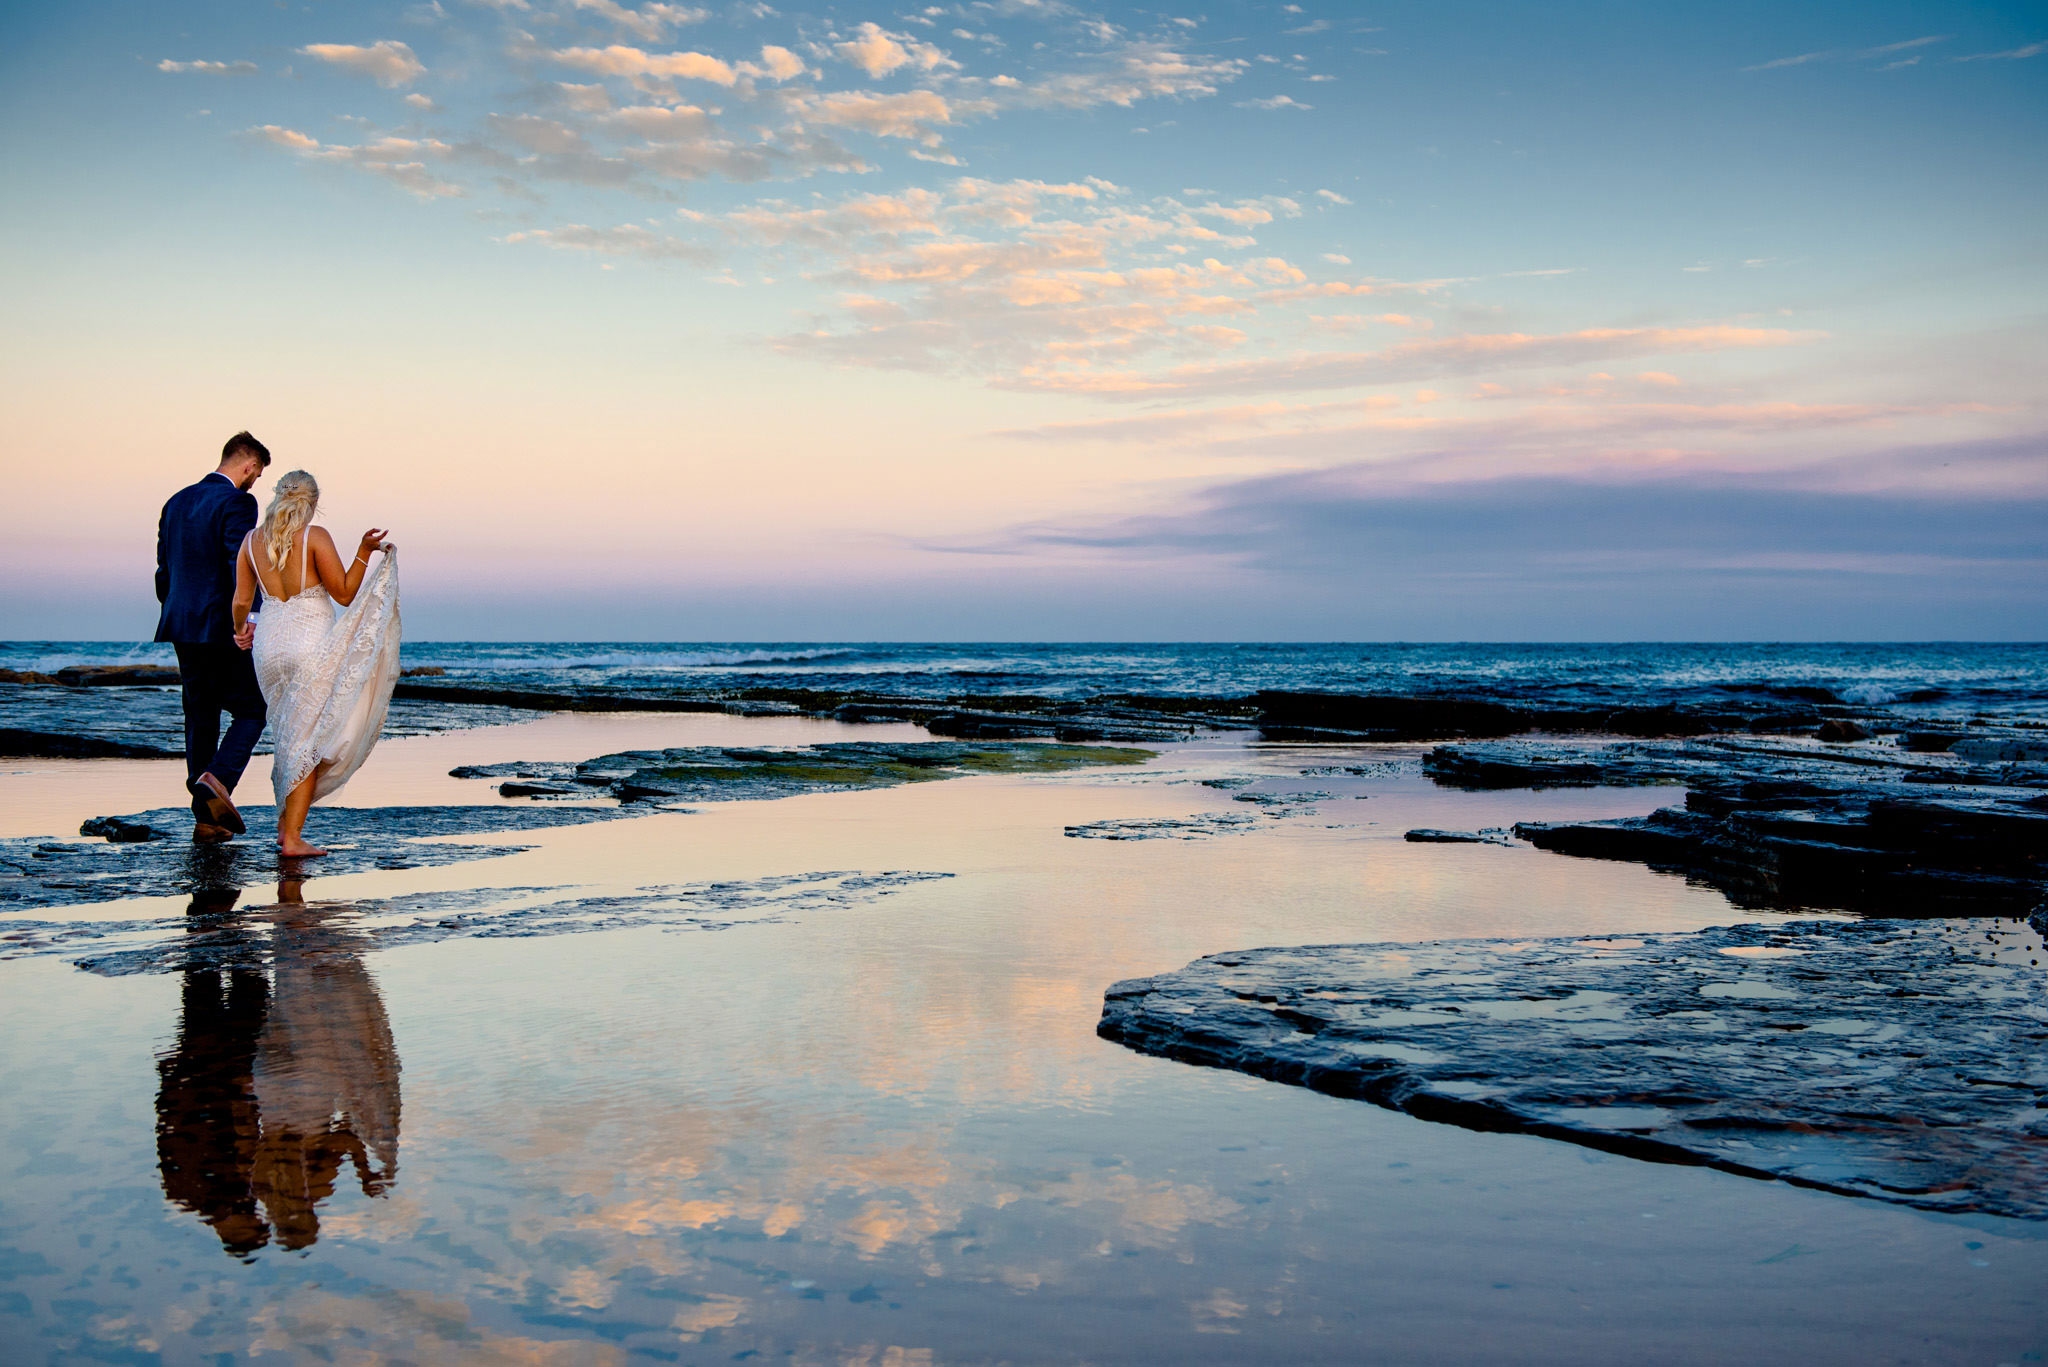 Reflection of newlyweds on the water at Narrabeen pools at sunset